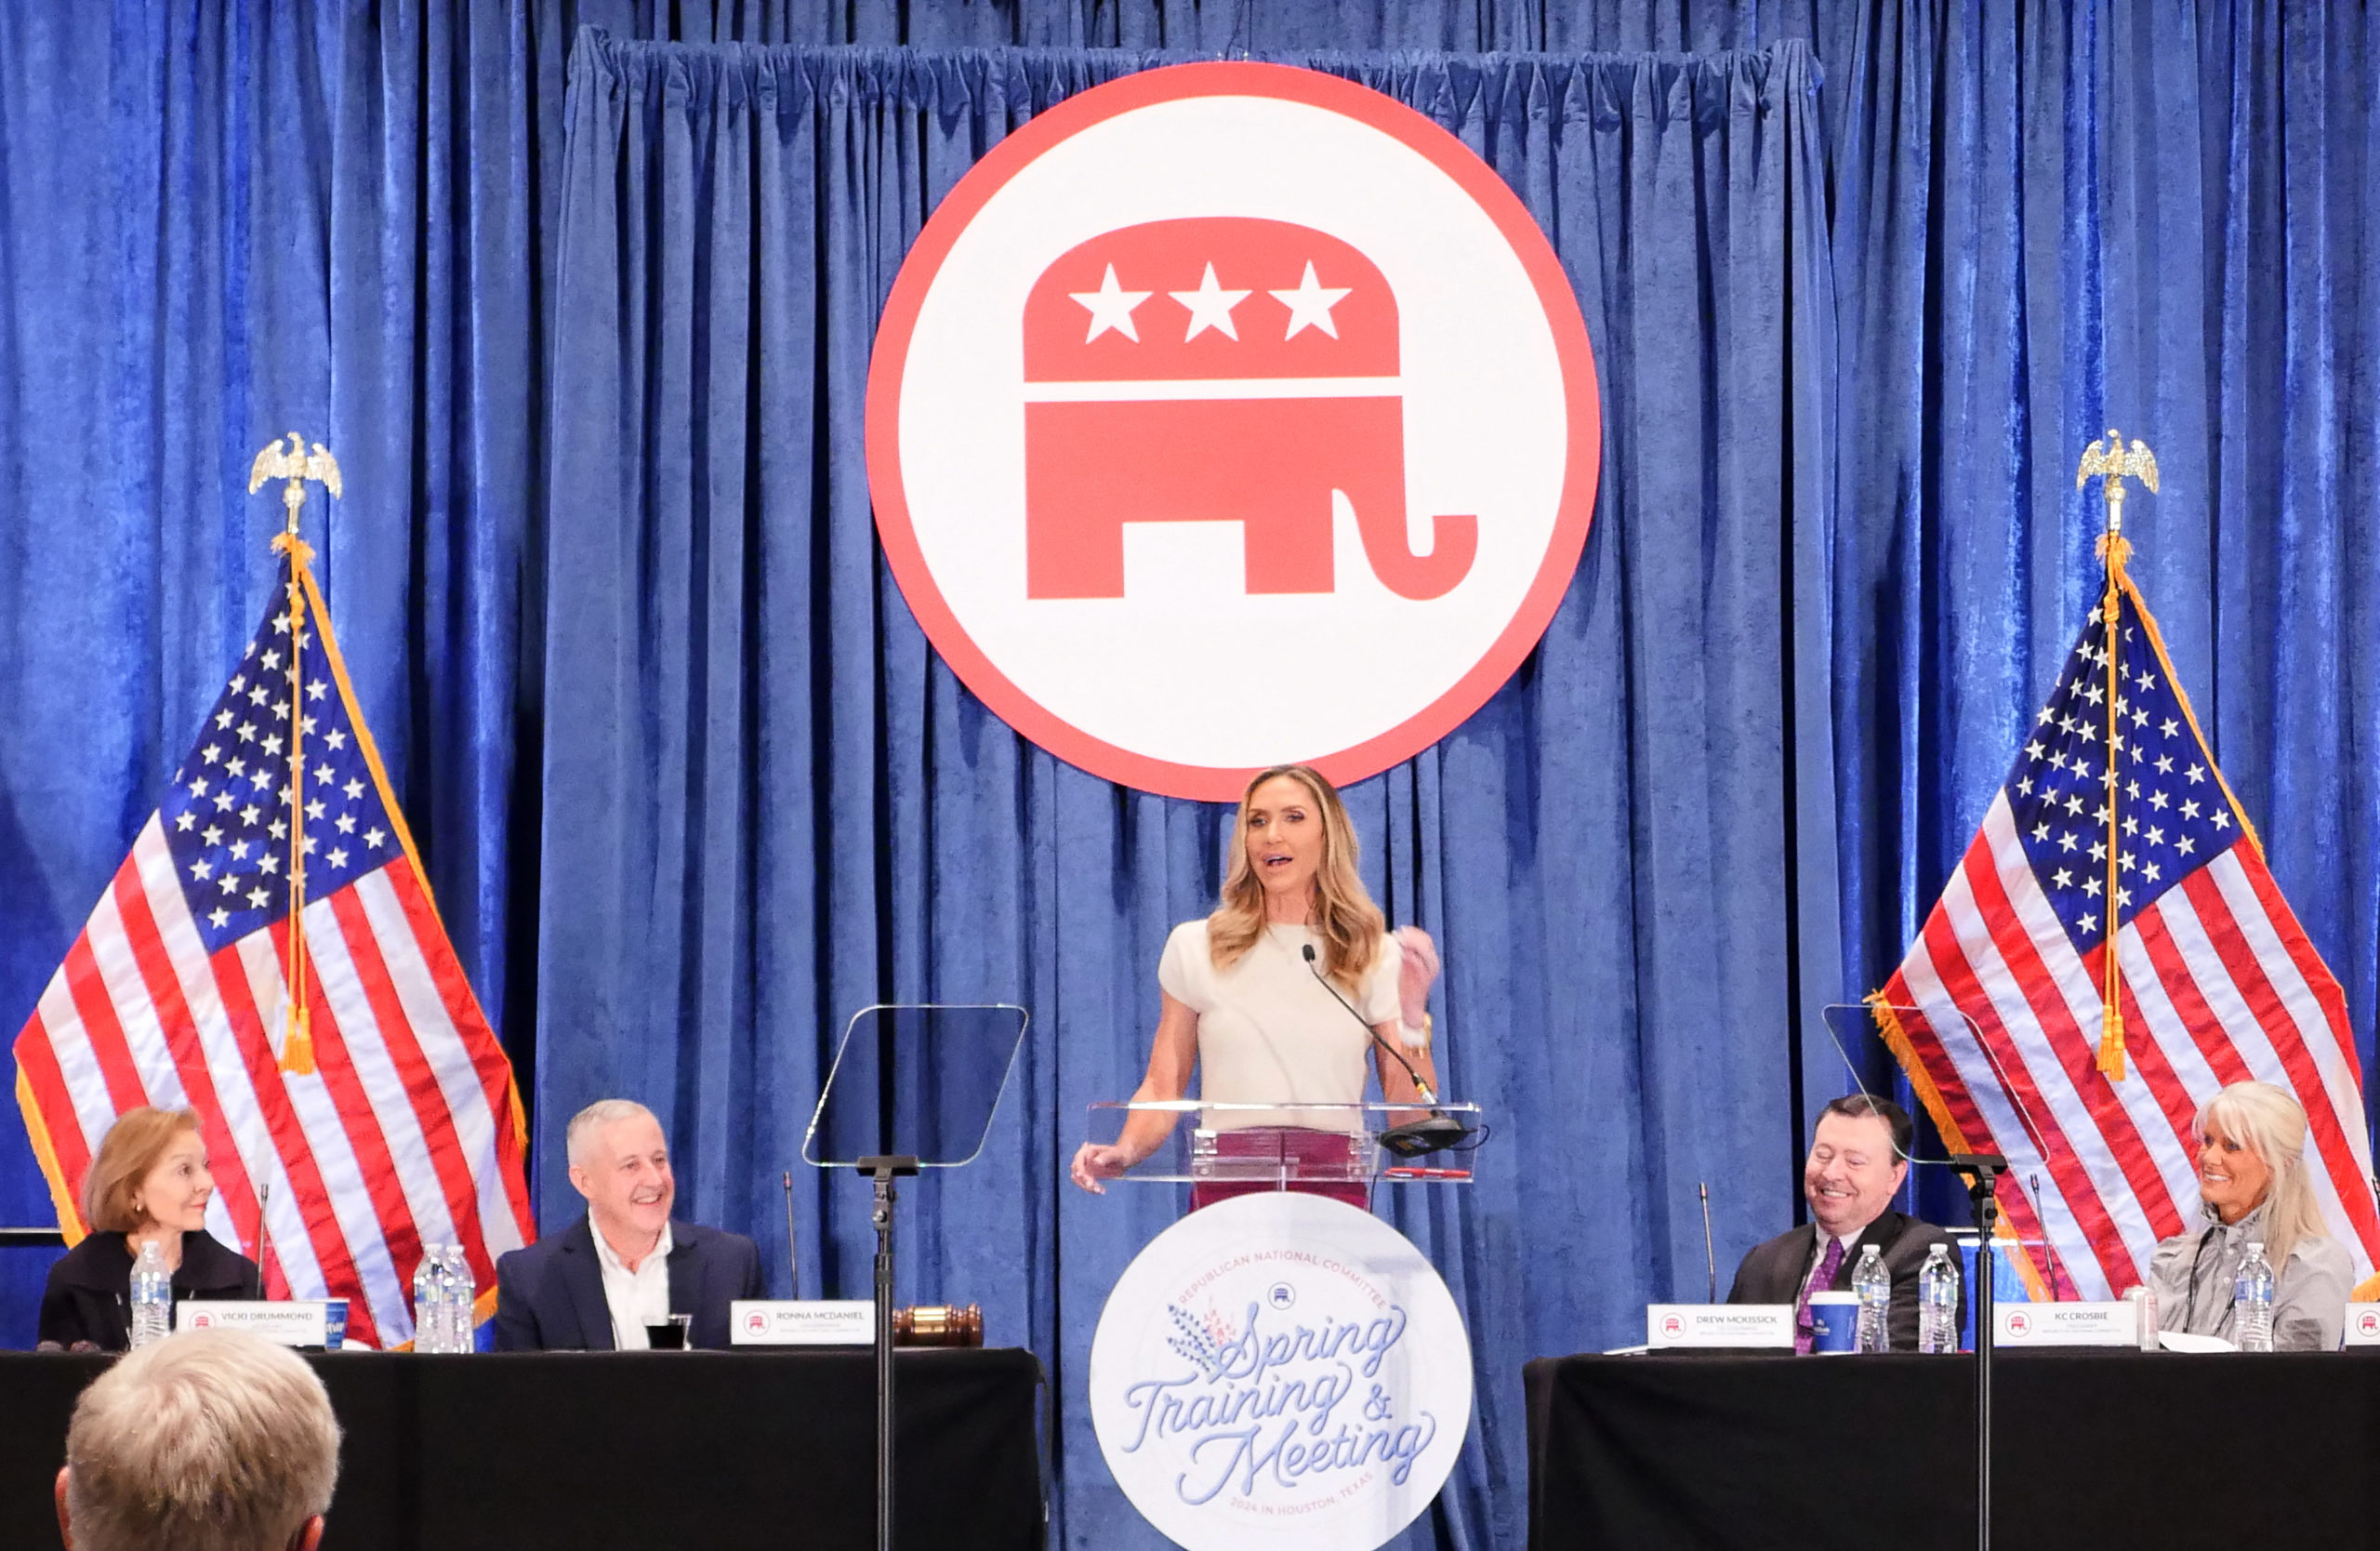 Lara Trump, daughter-in-law of former US President Donald Trump, speaks at the Republican National Committee (RNC) Spring meeting on March 8, 2024, in Houston, Texas. The RNC elected Lara Trump co-chair of the committee and Michael Whatley as chairman, tightening the former president's grip over the party ahead of the November election. (Photo by Cécile Clocheret / AFP) (Photo by CECILE CLOCHERET/AFP via Getty Images)